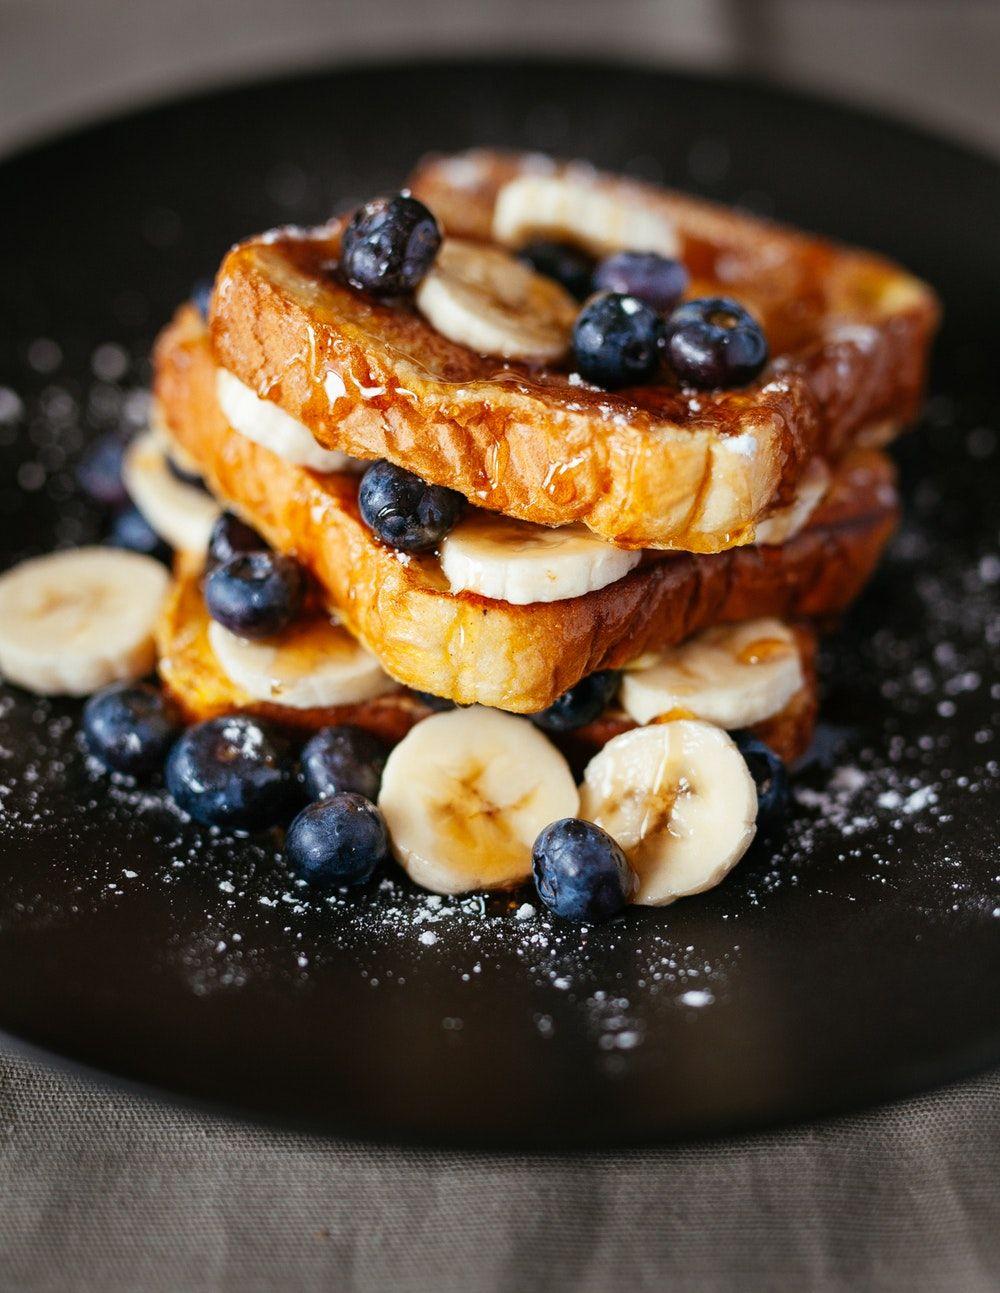 French Toast Picture. Download Free Image